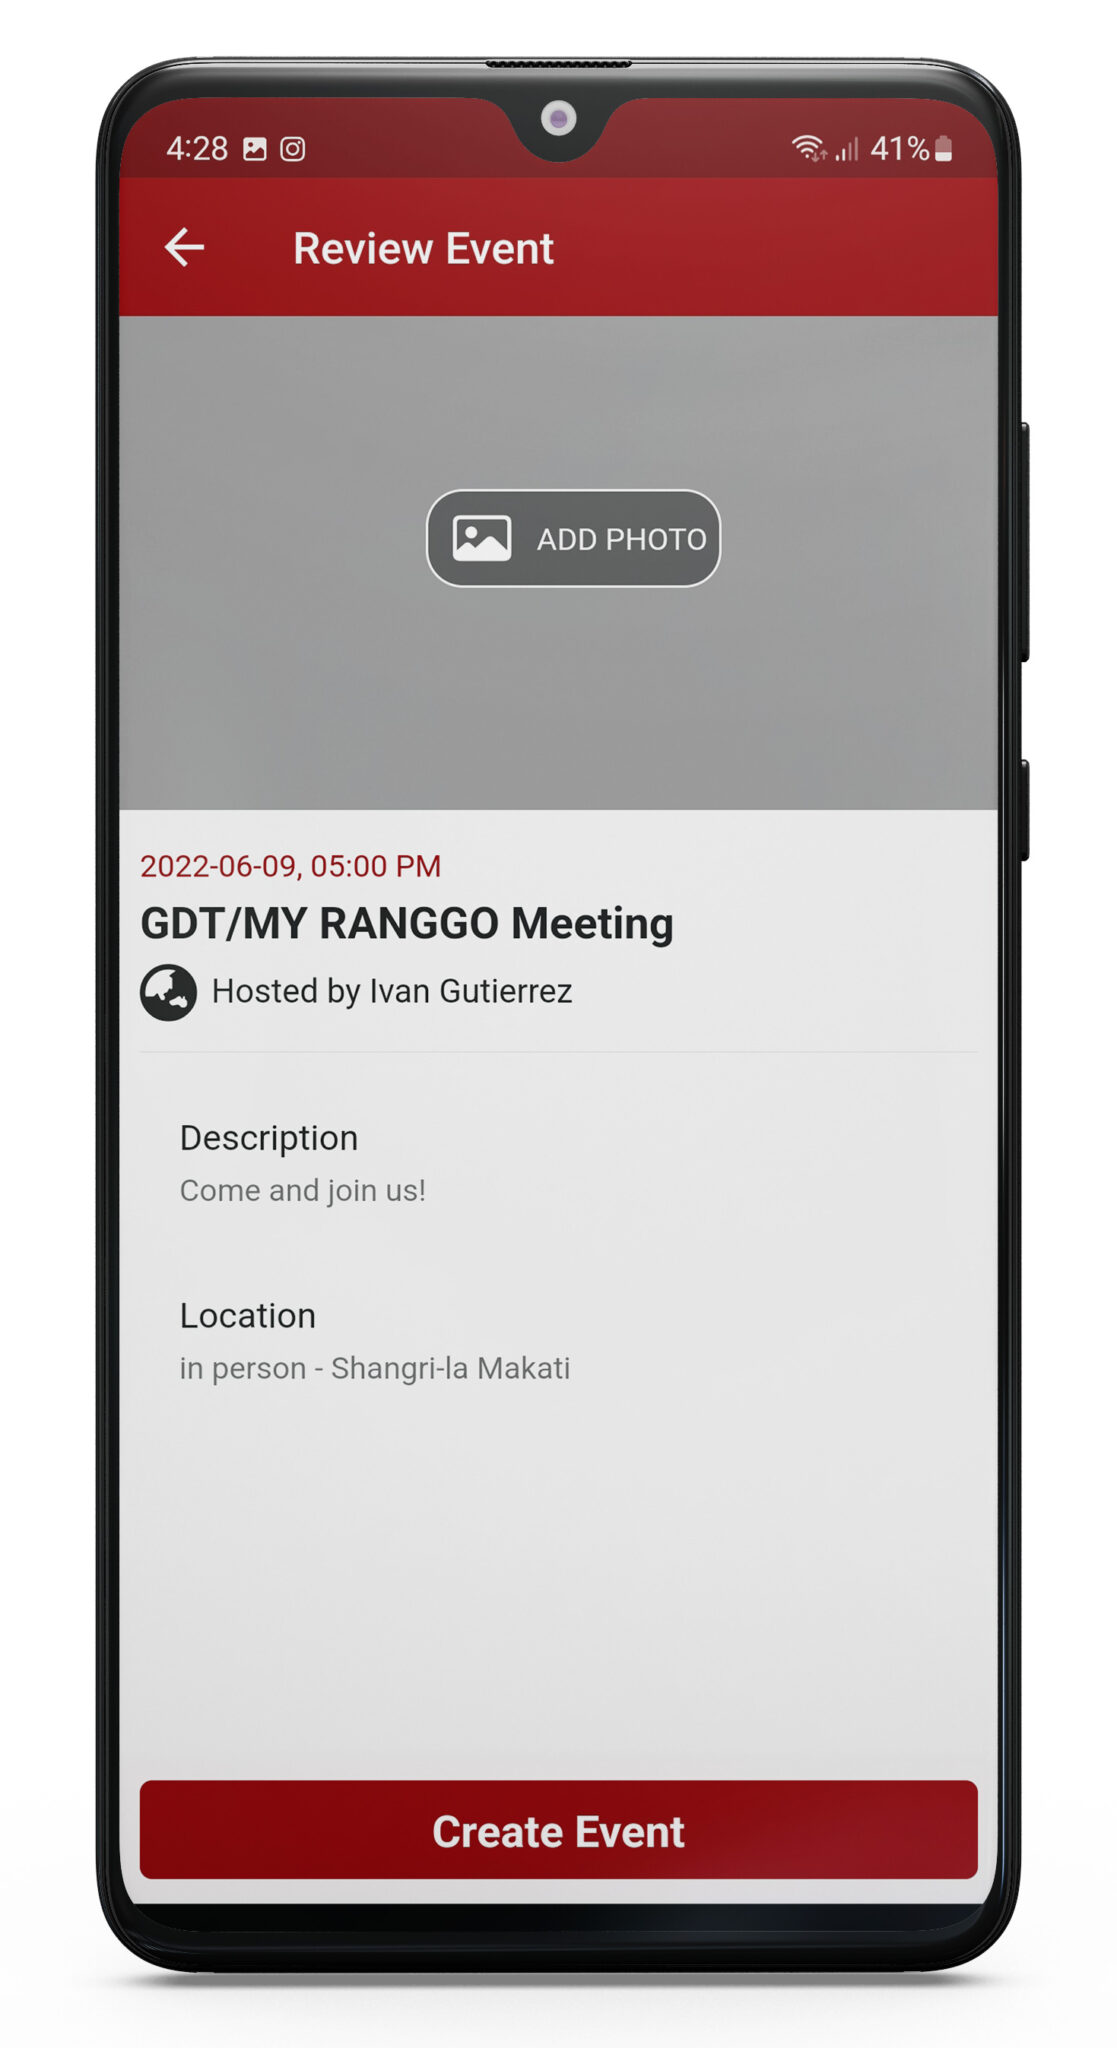 Final step when create and share events on RANGGO App